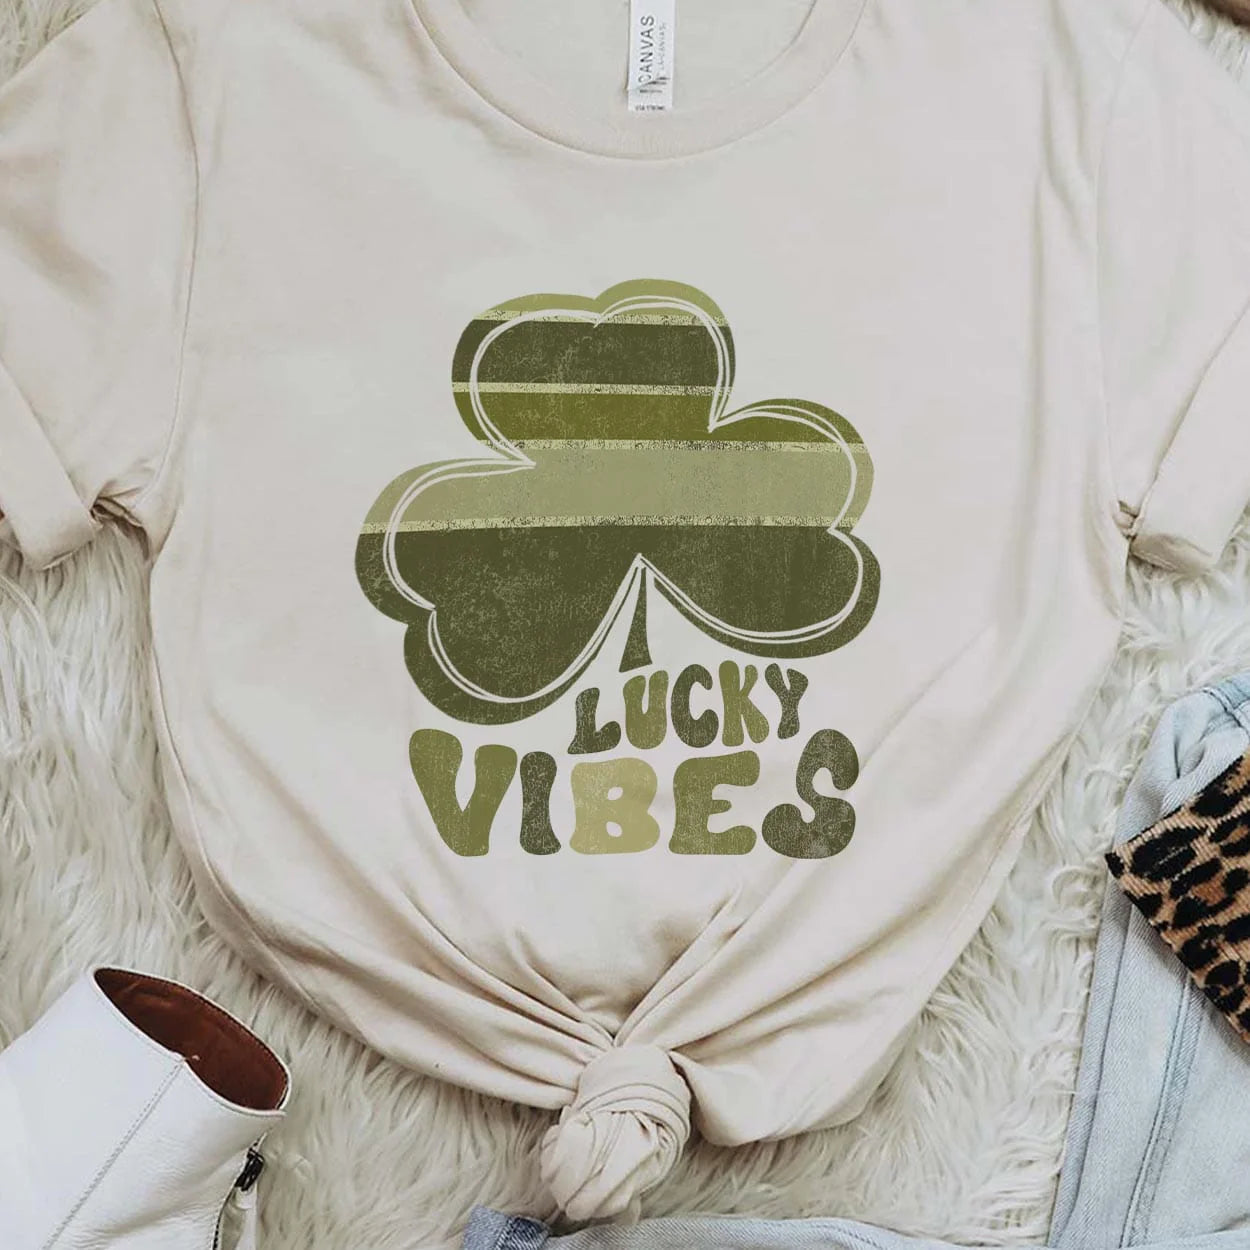 A cream crew neck sweatshirt featuring a large graphic of a clover with various shades of green and the words "lucky vibes" below it with each letter coordinating to a color in the clover. Item is pictured on a white background.